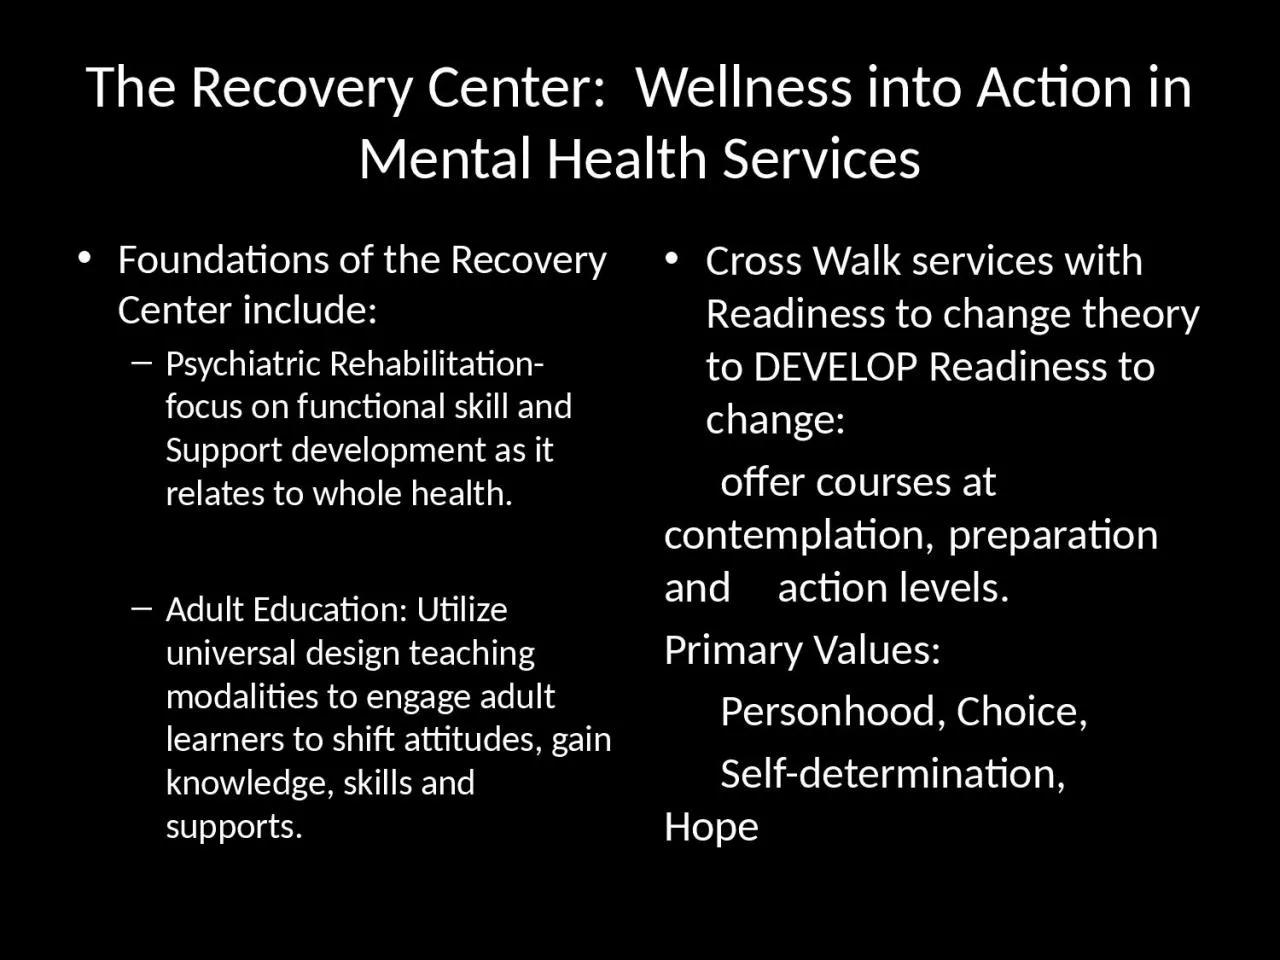 The Recovery Center:  Wellness into Action in Mental Health Services